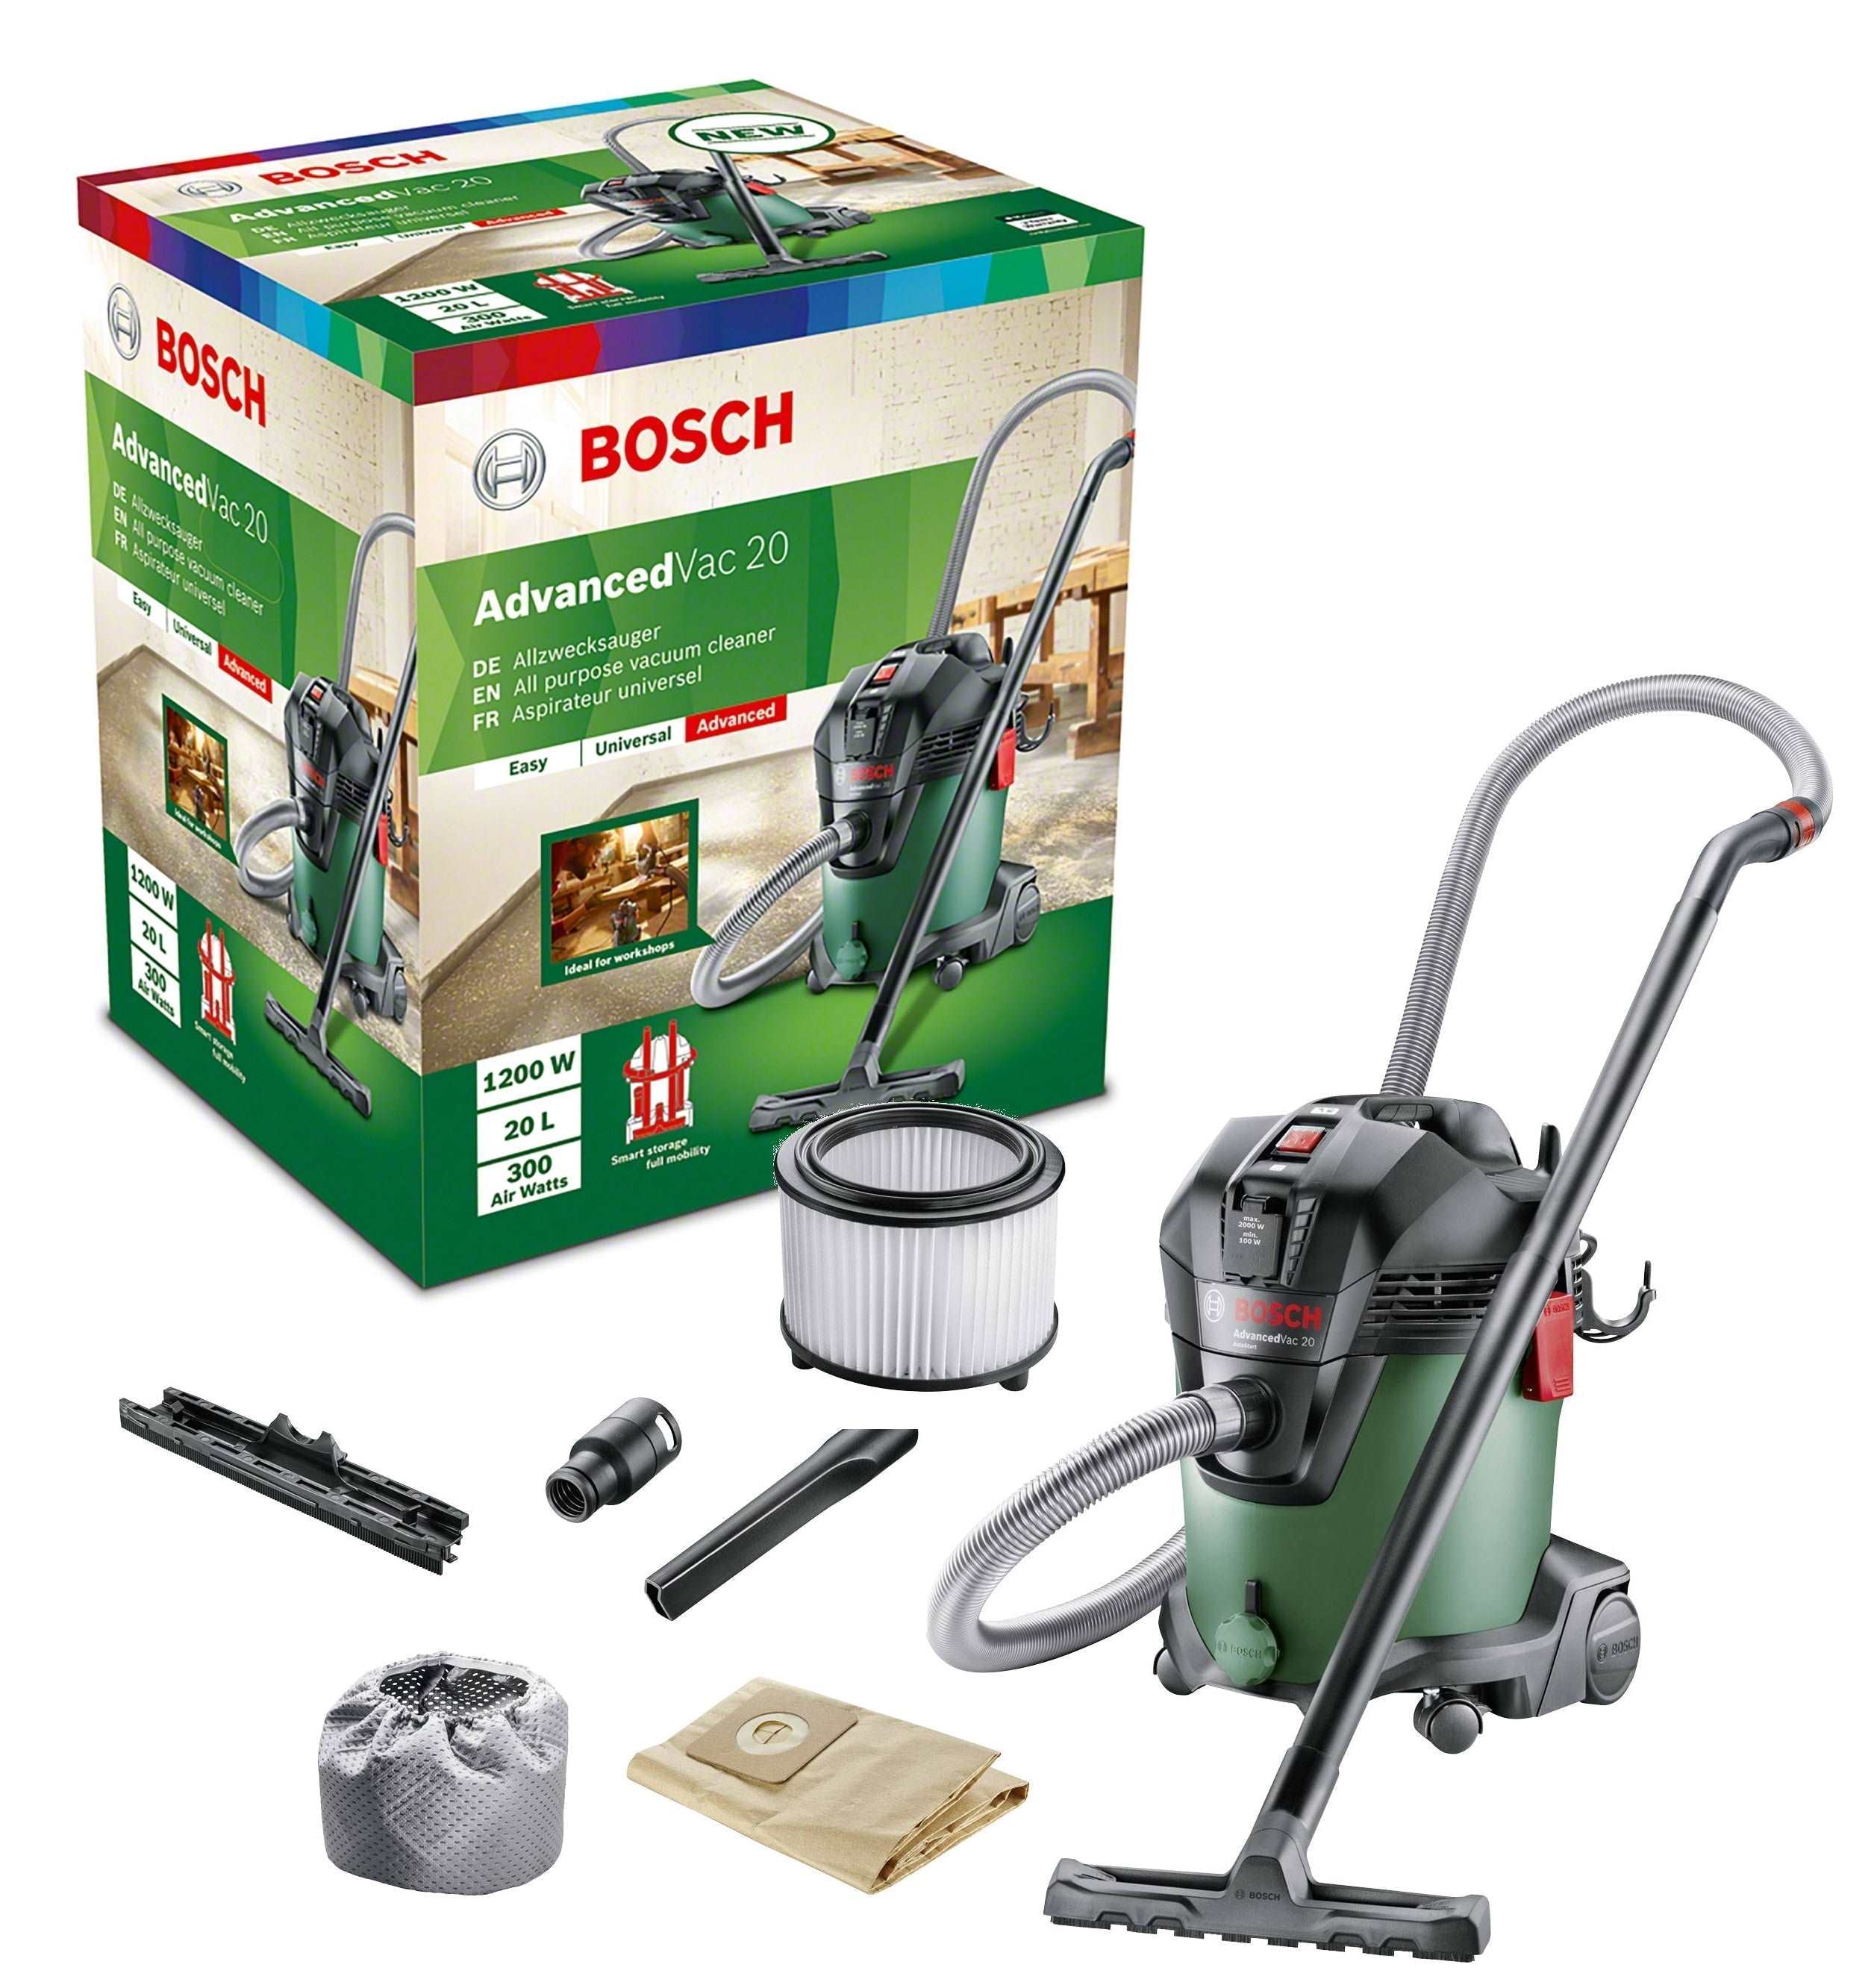 Bosch Advancedvac 20 Wet And Dry Vacuum Cleaner Power Tool Services